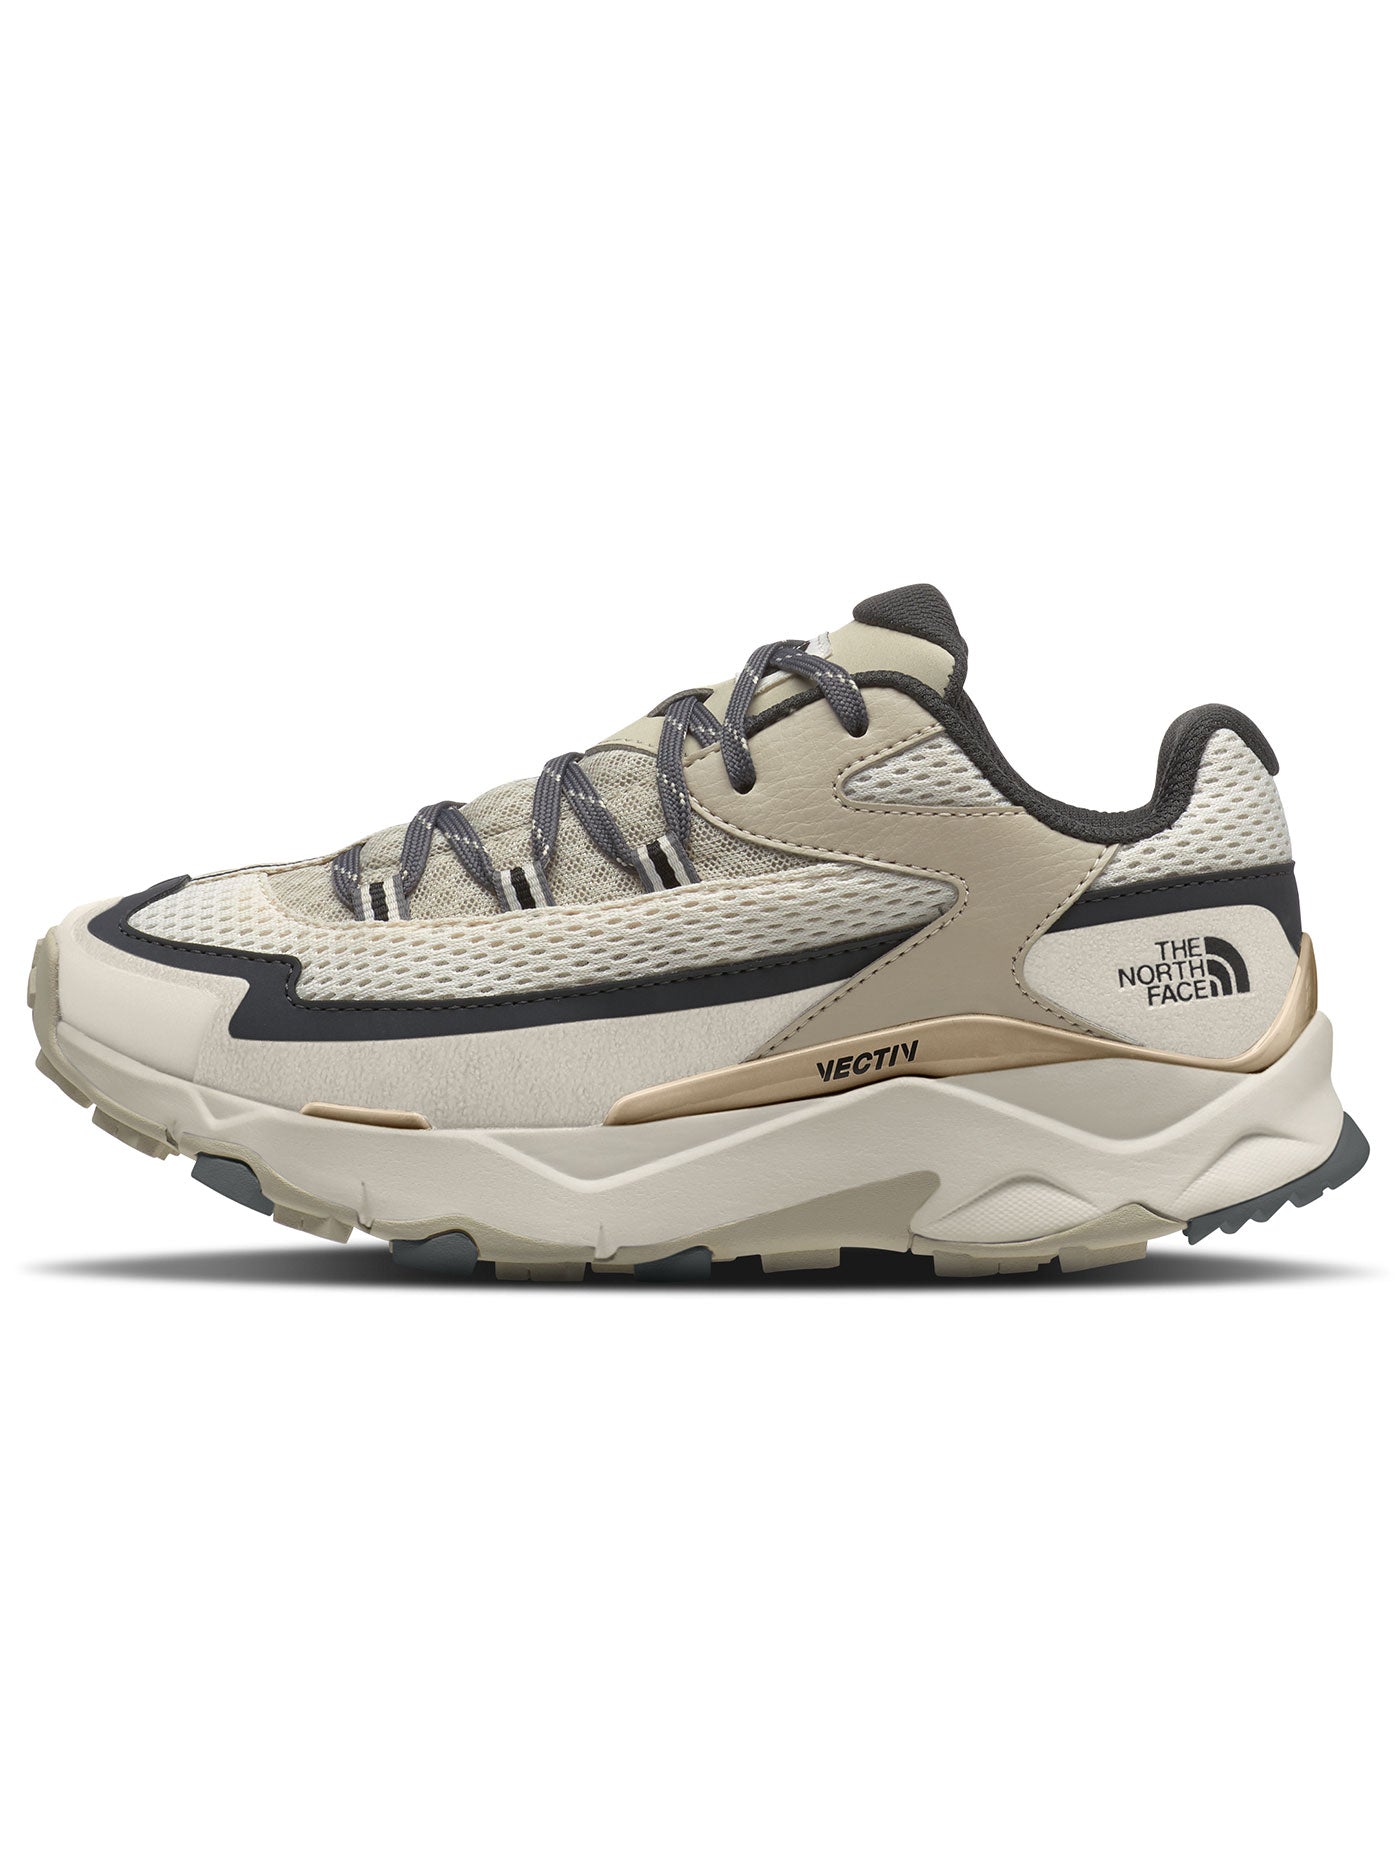 The North Face Vectiv Taraval Shoes